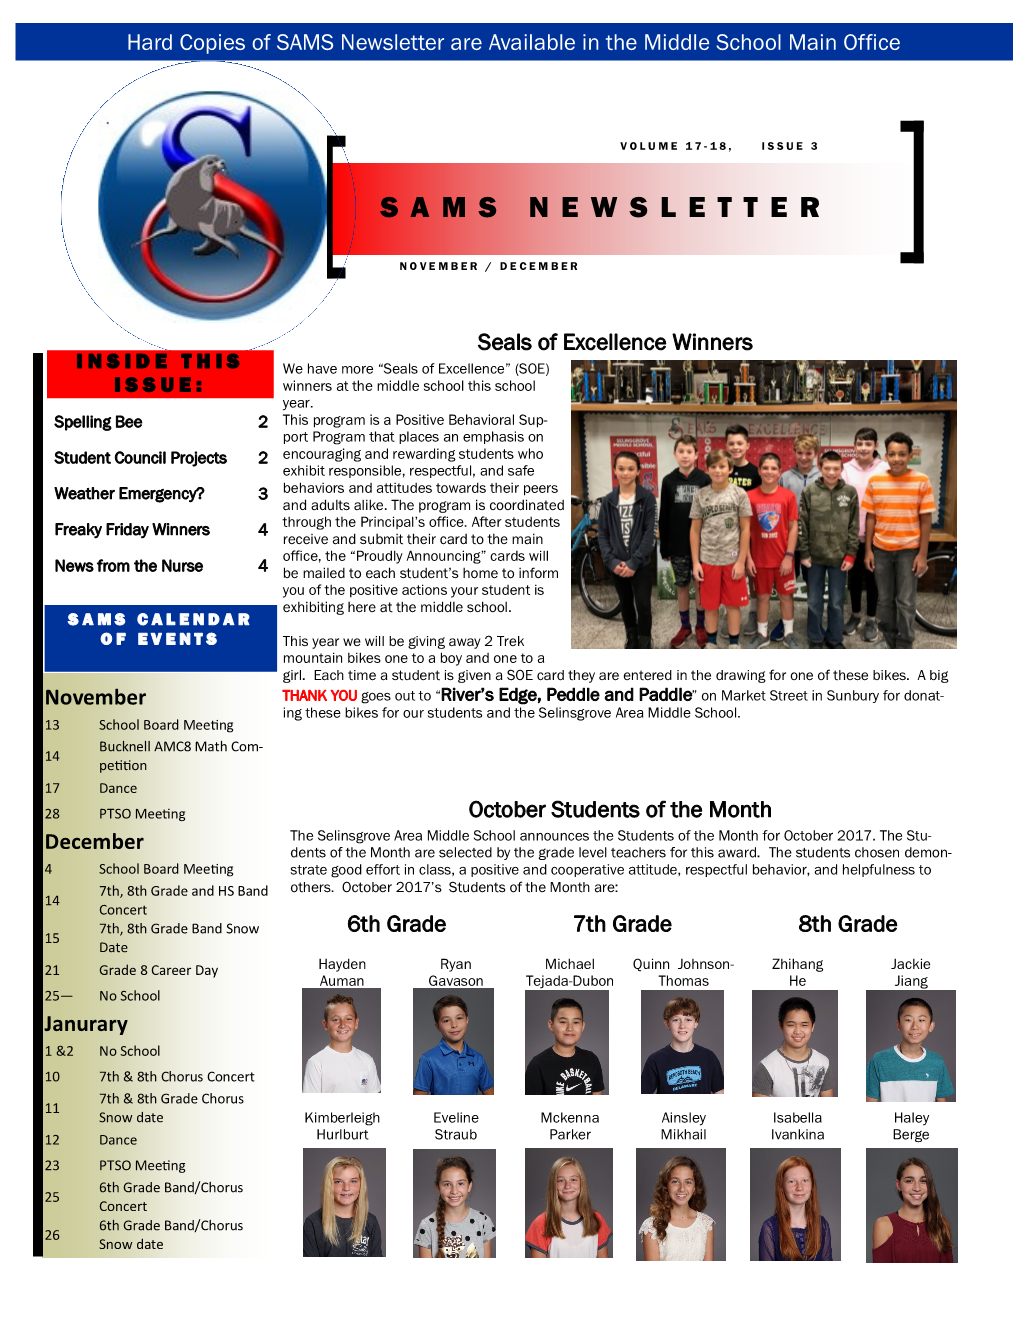 SAMS Newsletter Are Available in the Middle School Main Office